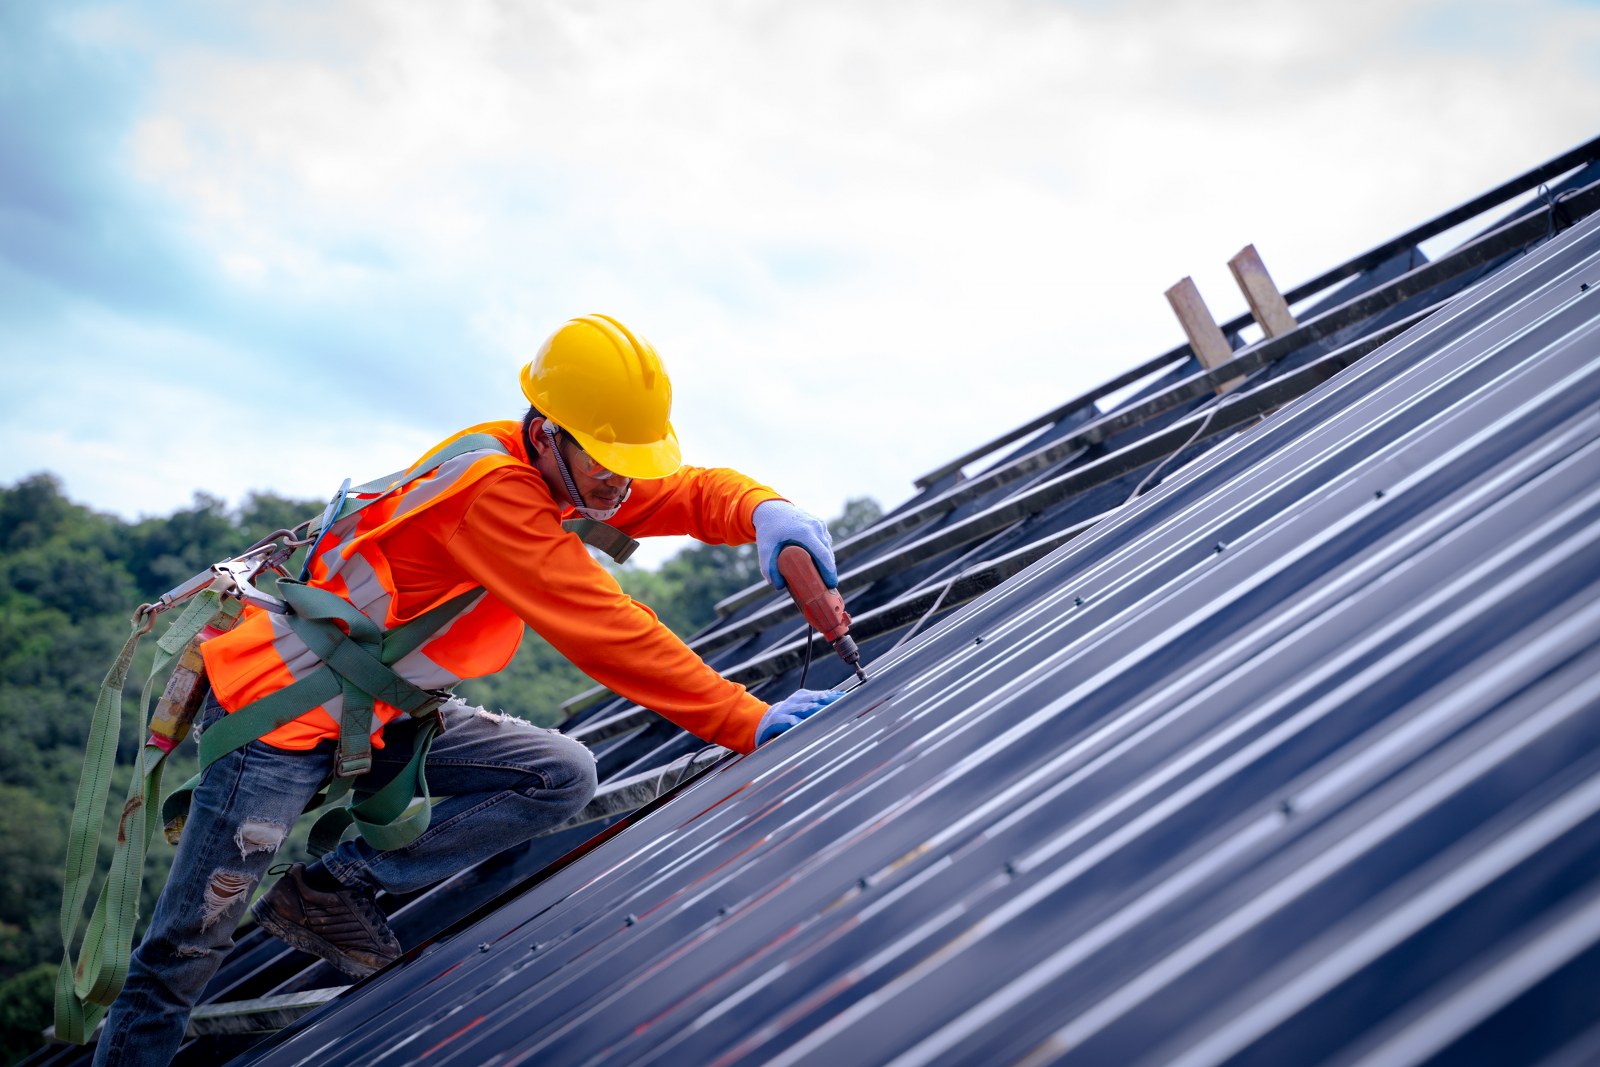 5 Reasons To Hire A Professional Roofer For Your Next Project